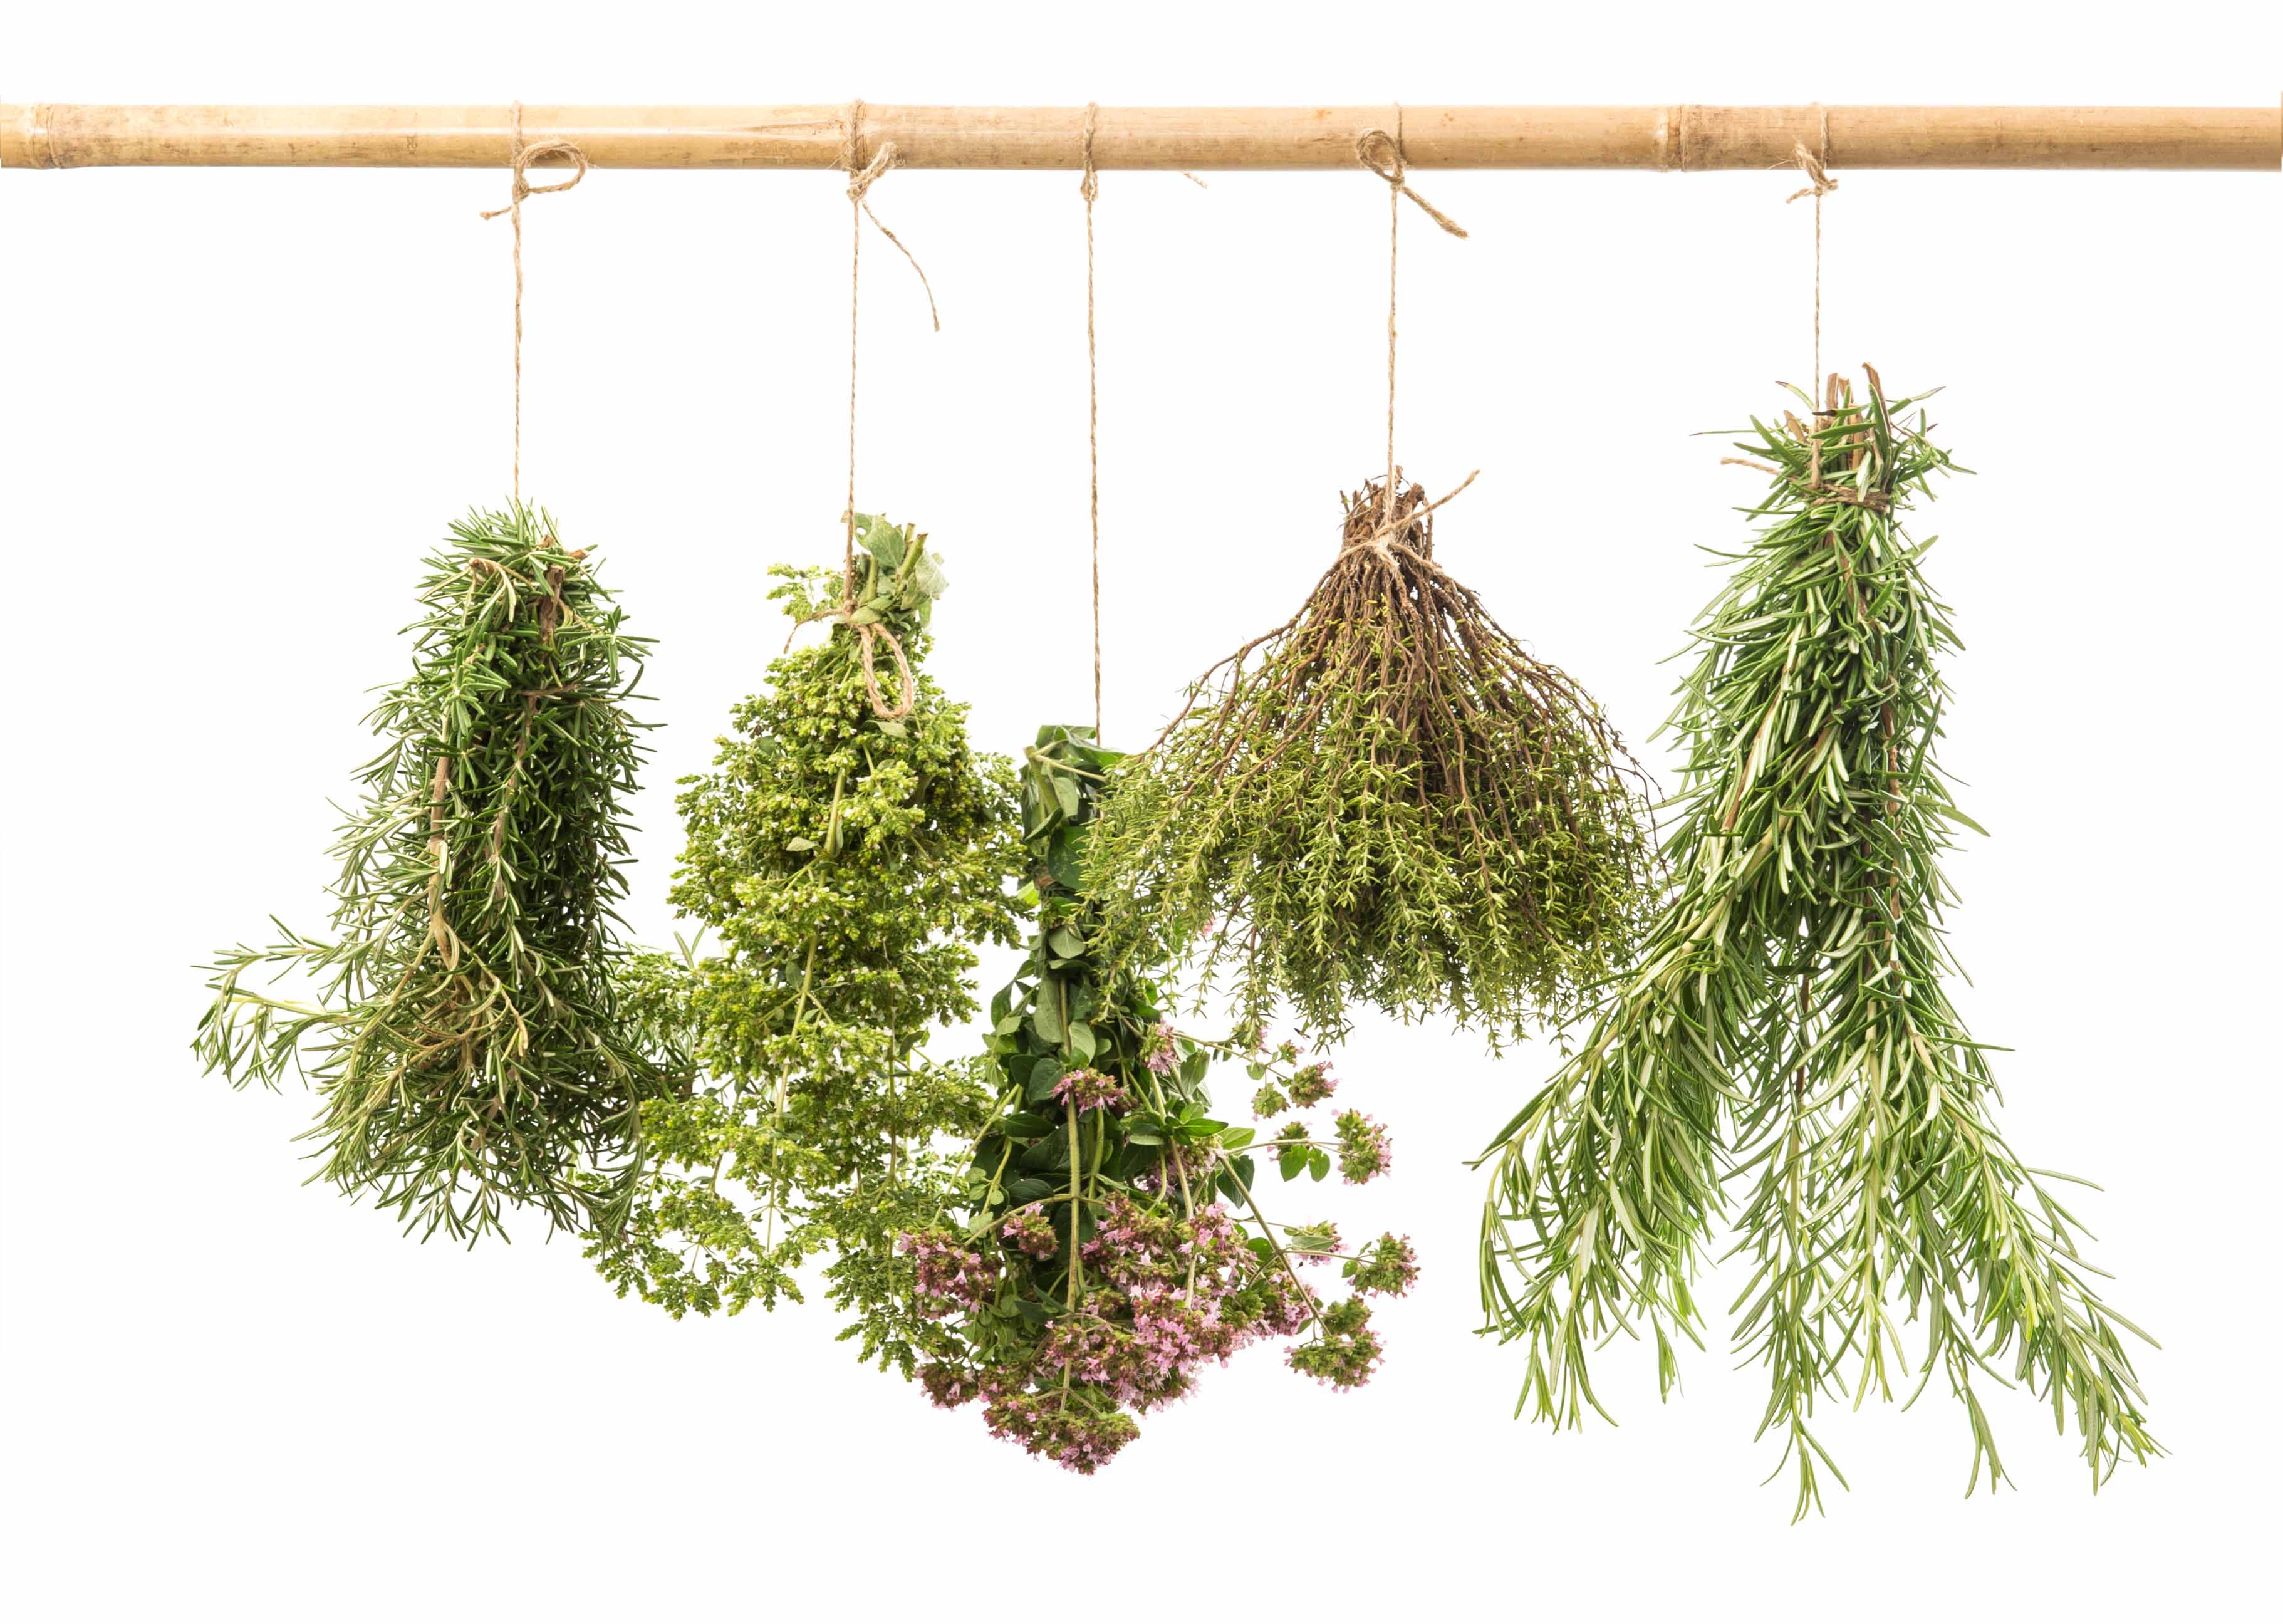 Thyme, oregano parsley and many more herbs hung on a string to dry out